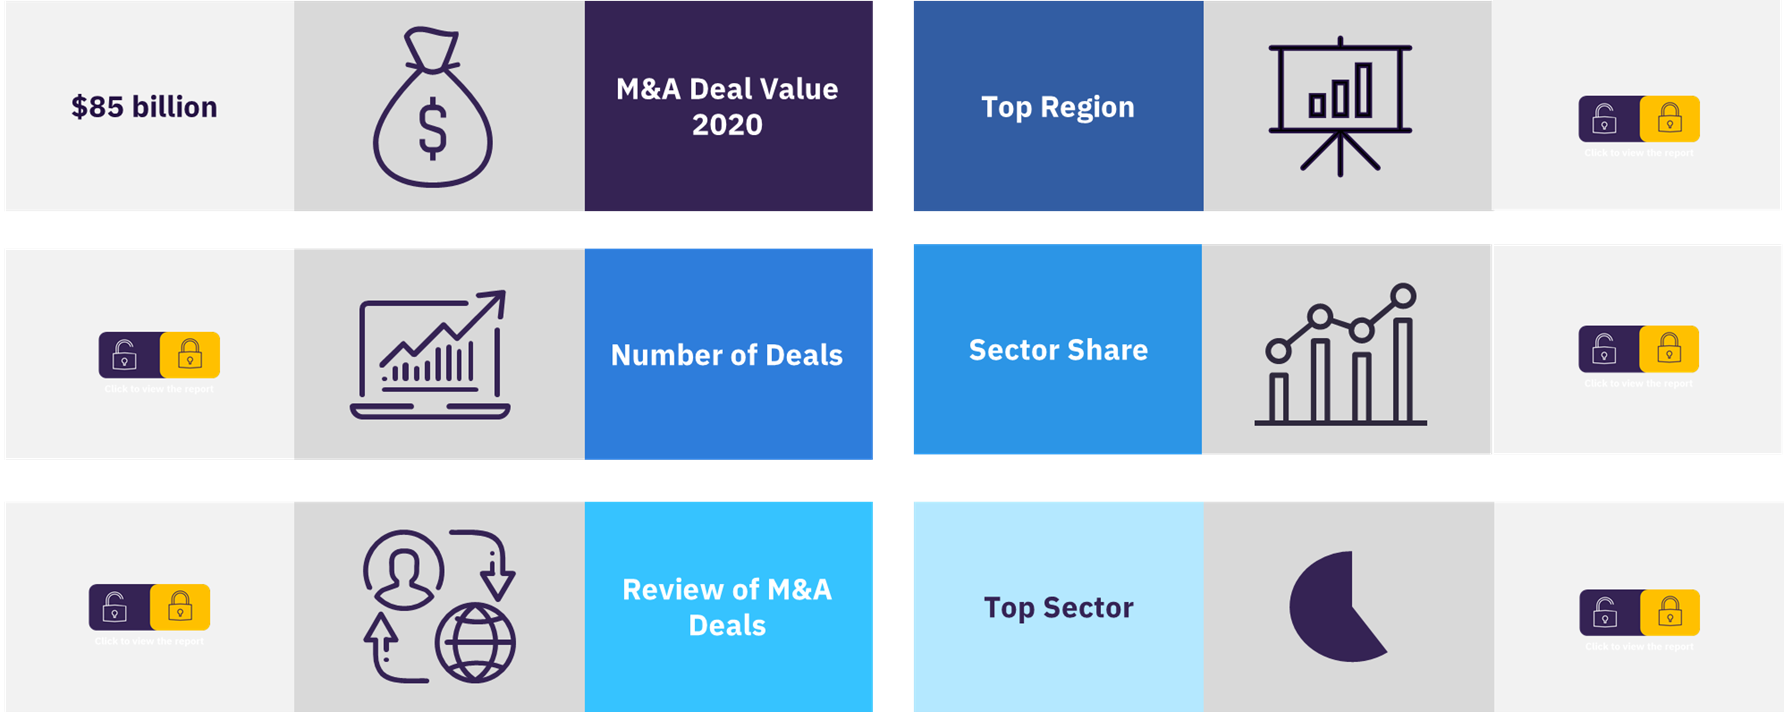 Overview of the global M&A deals in the travel and tourism sector